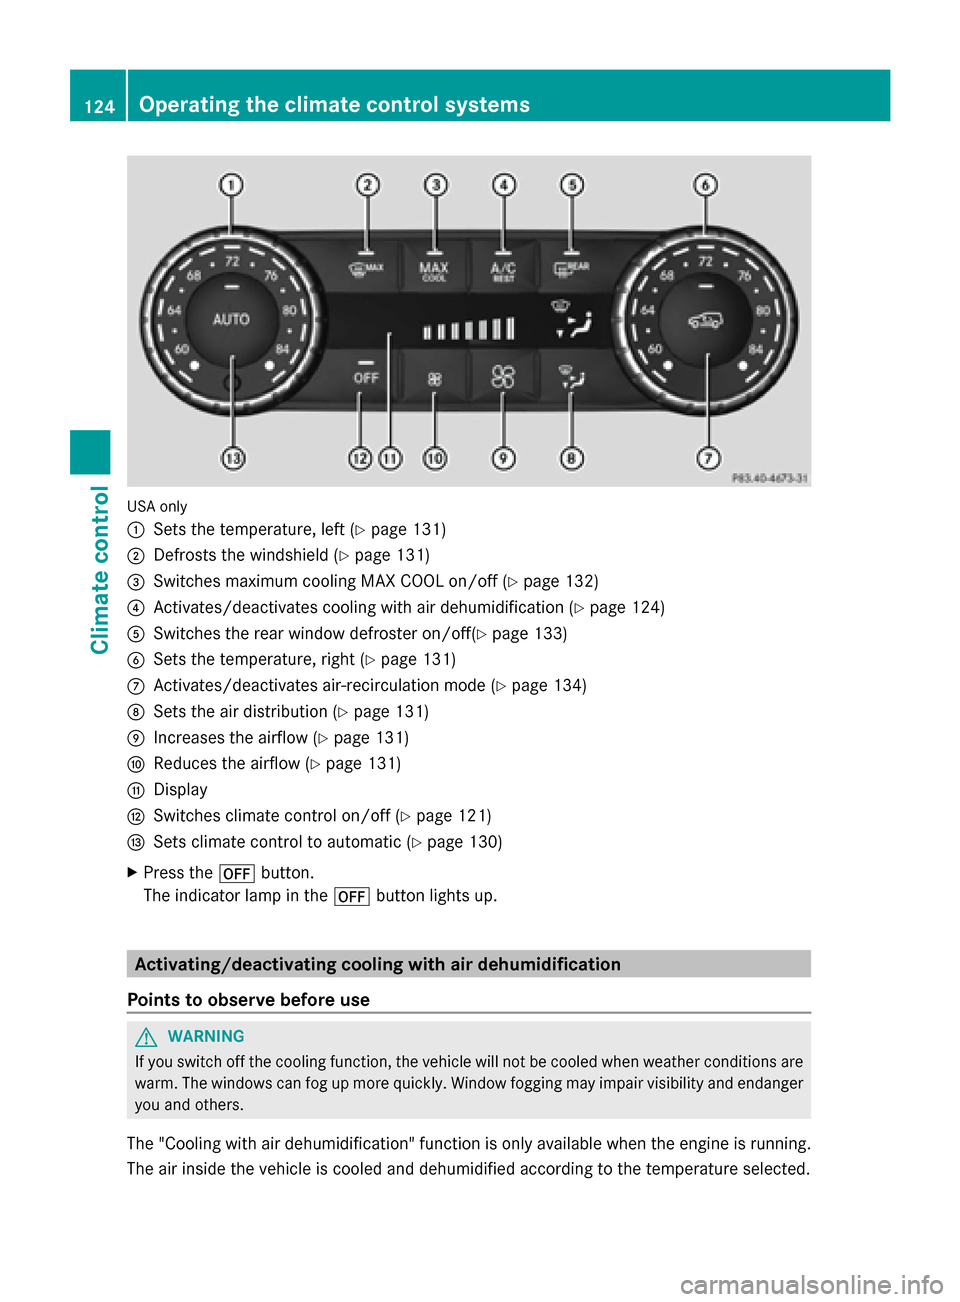 MERCEDES-BENZ G-Class 2014 W463 Service Manual USA only
0043
Sets the temperature, left (Y page 131)
0044 Defrosts the windshield (Y page 131)
0087 Switches maximum cooling MAX COOL on/off (Y page 132)
0085 Activates/deactivates cooling with air d